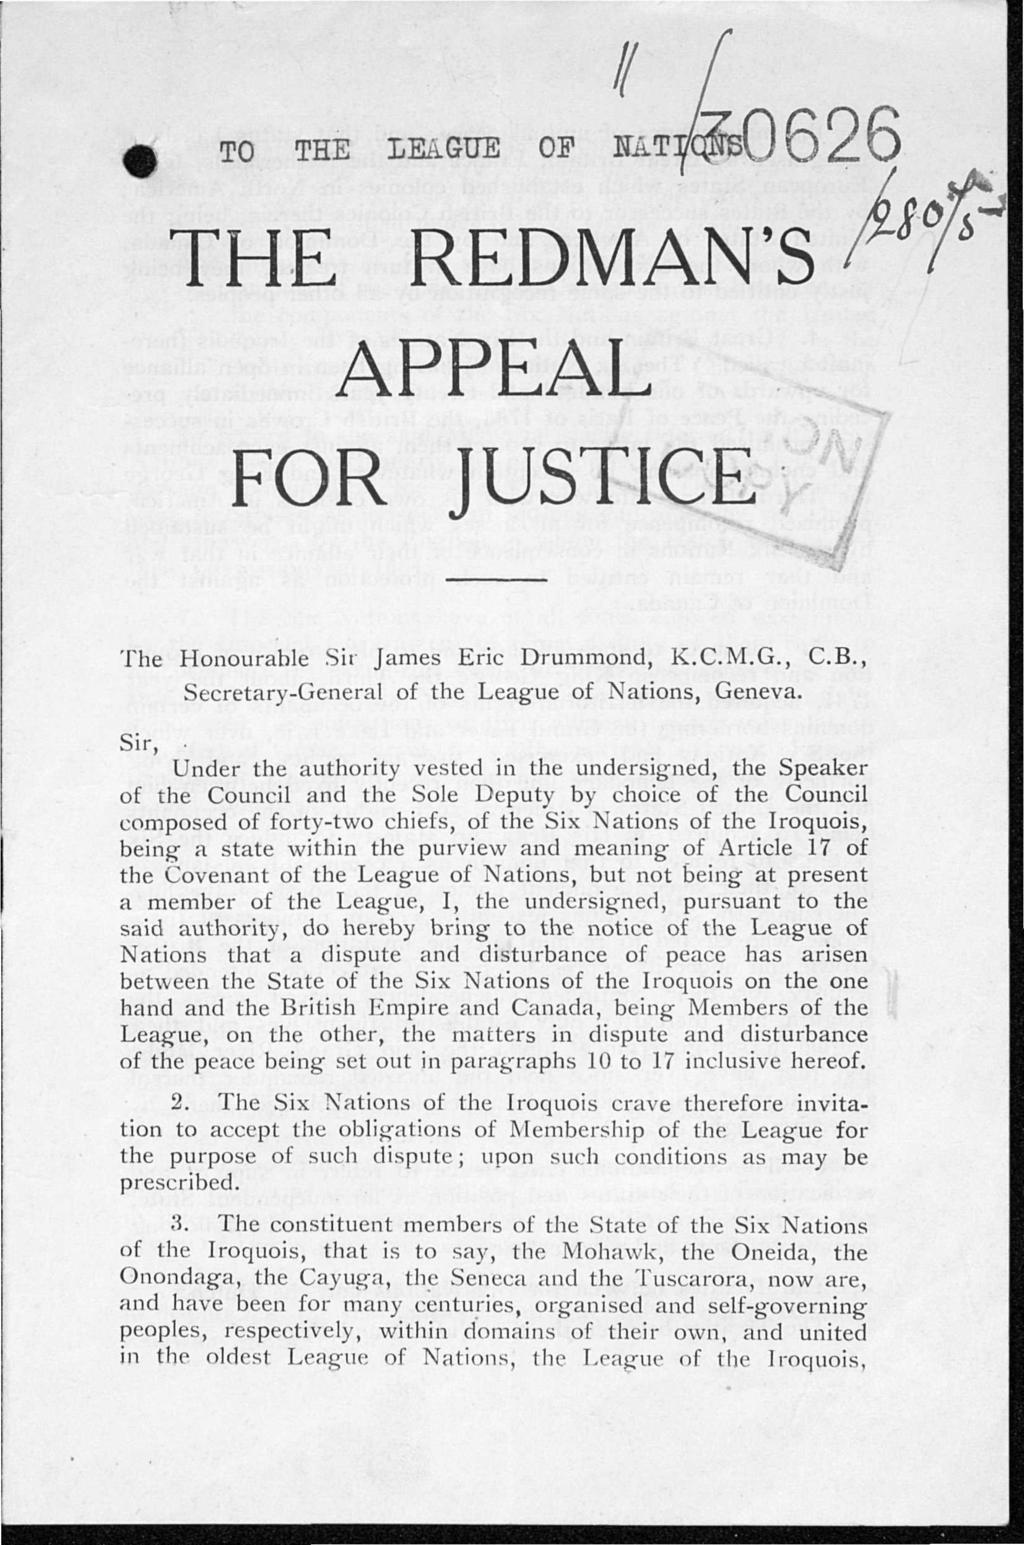 TO THE LEAGUE OF H&T^qjmsU Q _ Q THE REDMAN'S^' APPEAL FOR JUSTICE // The Honourable Sir James Eric Drummond, K.C.M.G., Secretary-General of the League of Nations, Geneva. C.B.